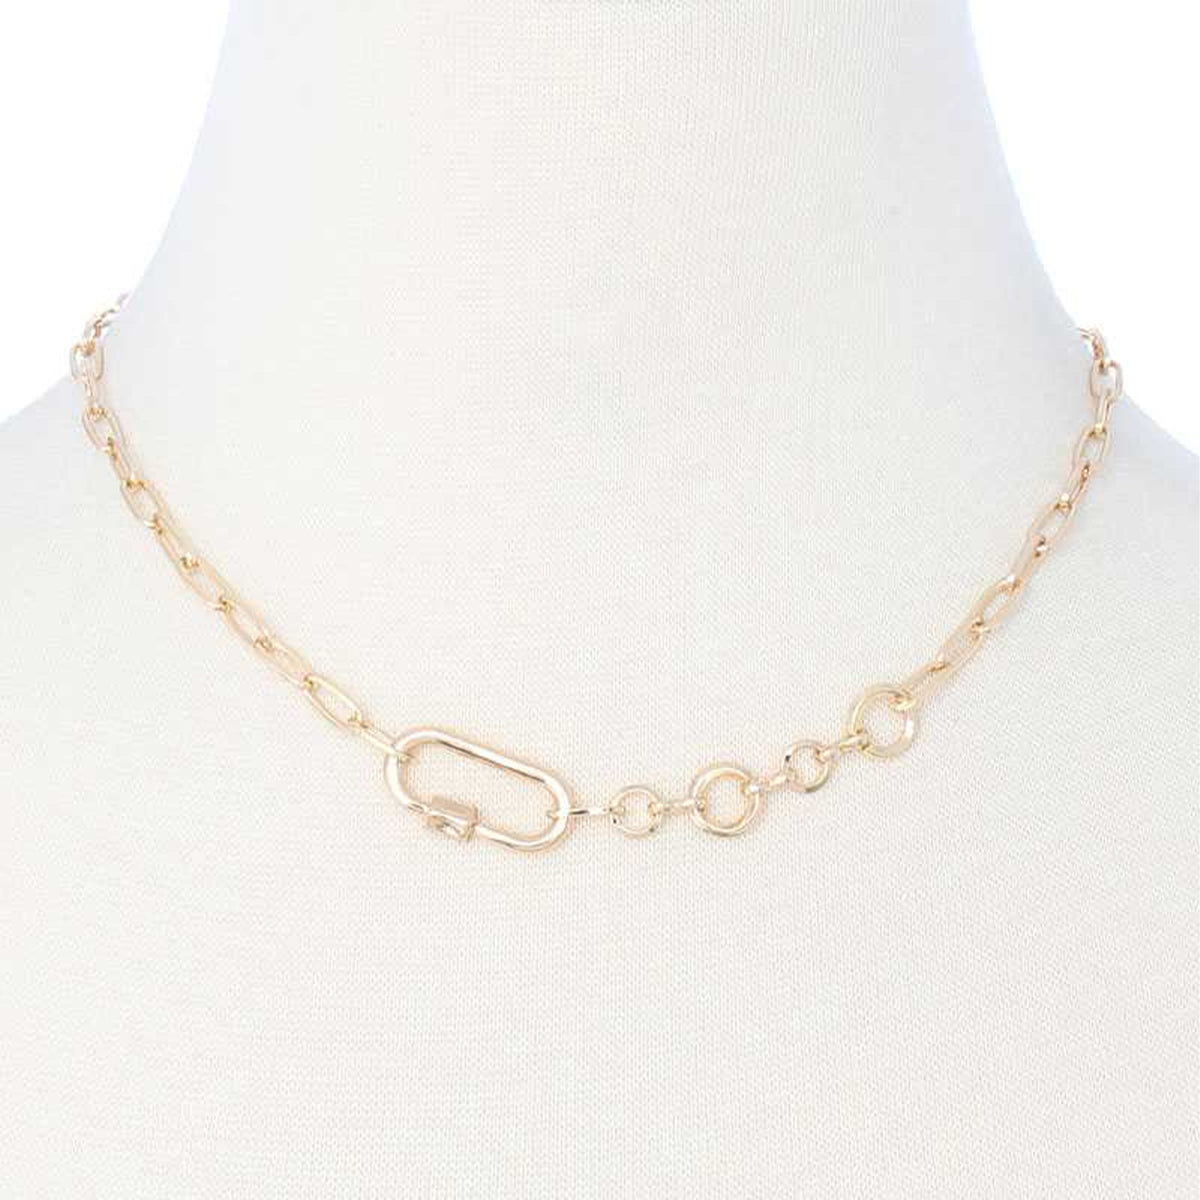 Metal Chain Necklace in Gold